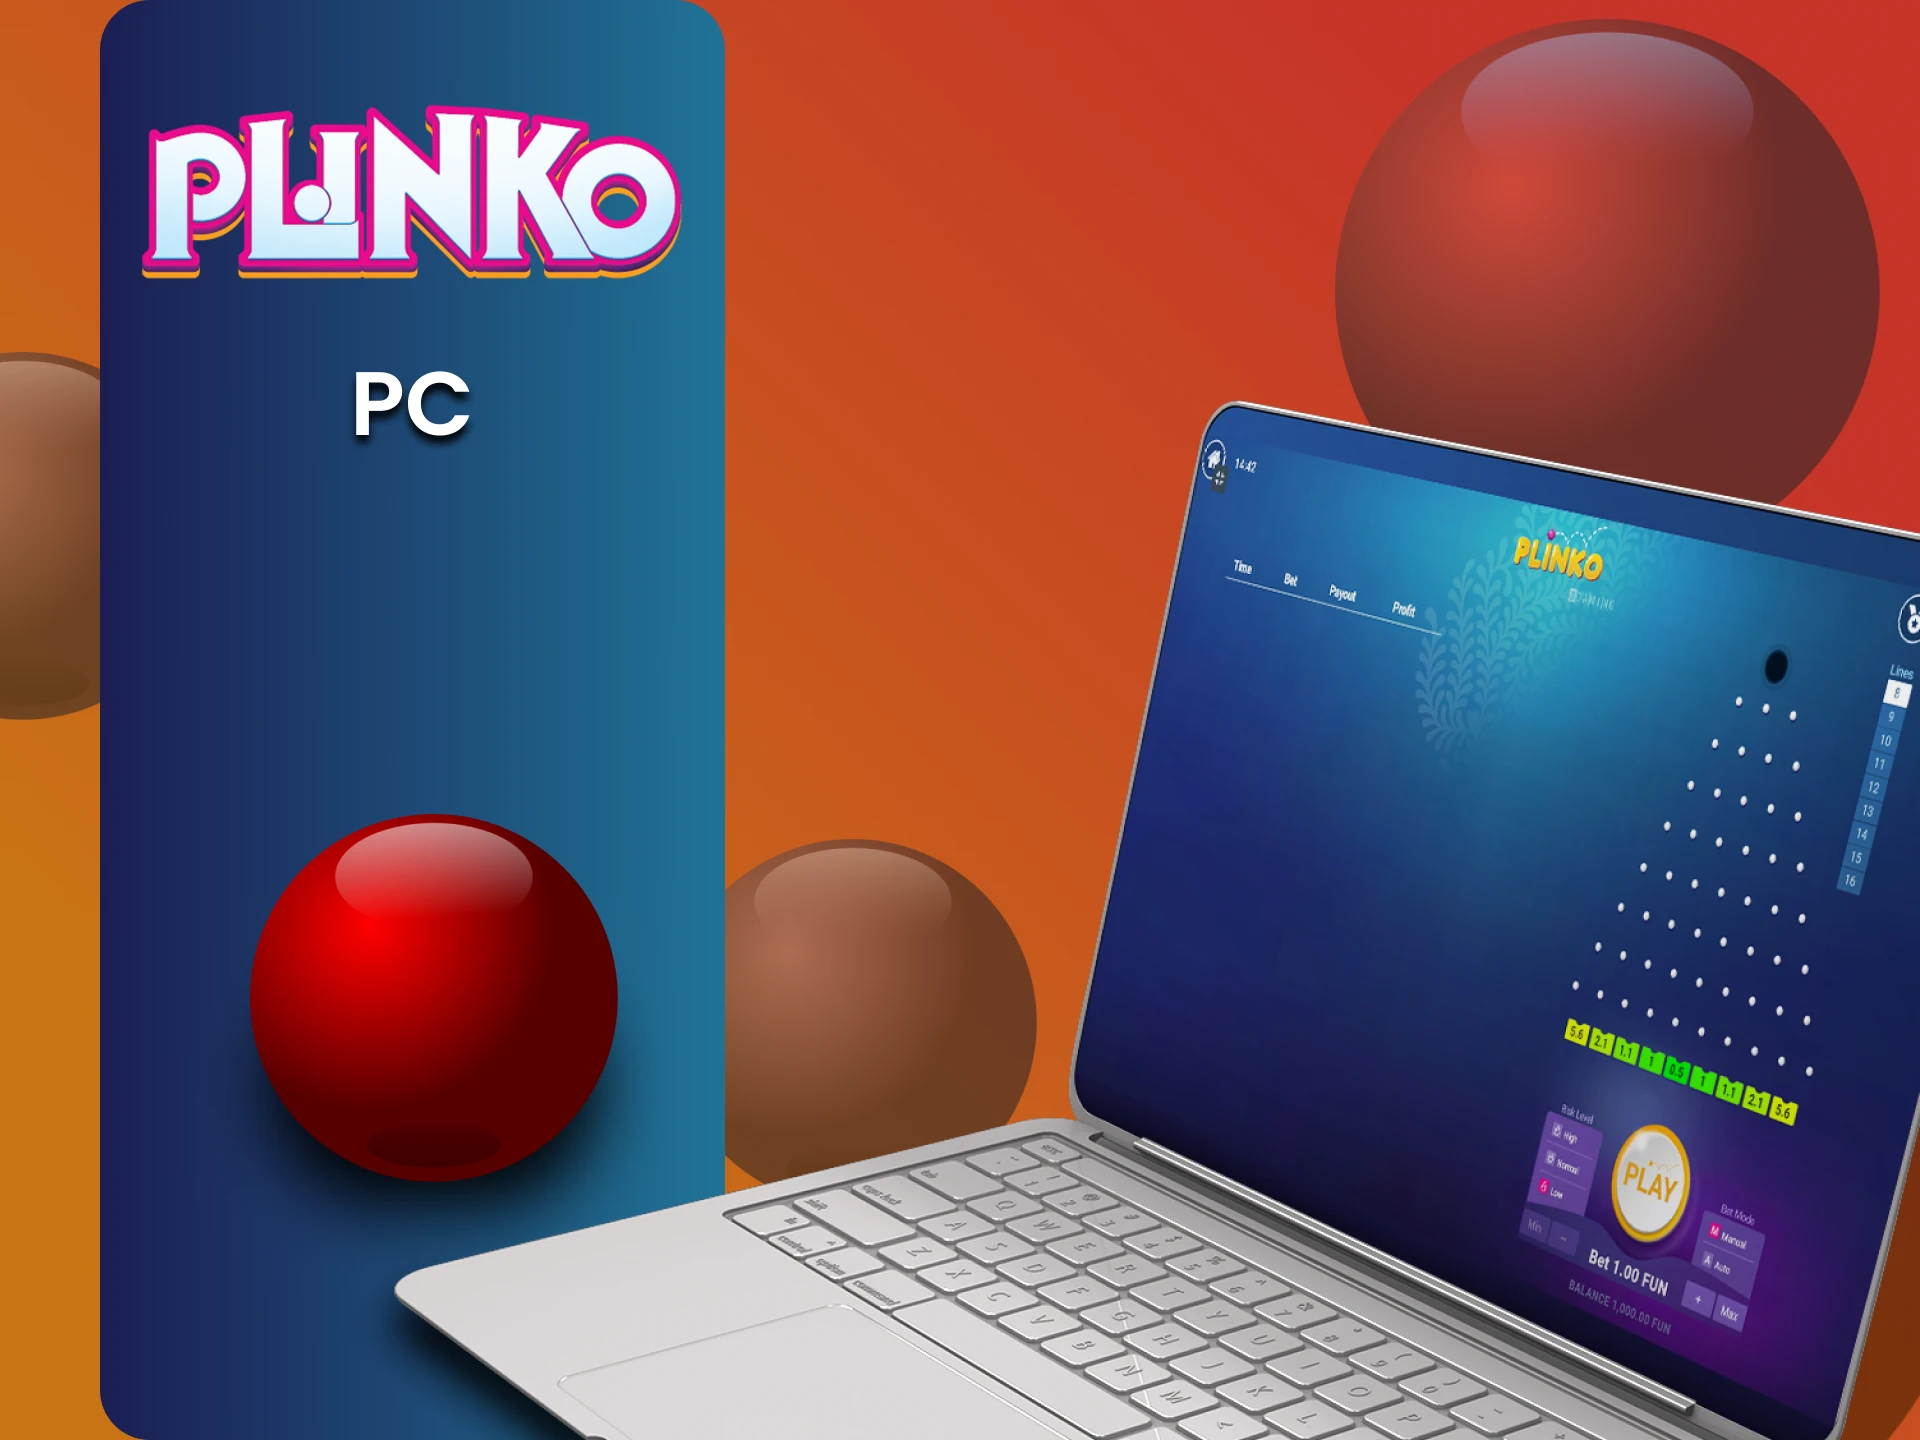 You can download the Plinko application for your PC.